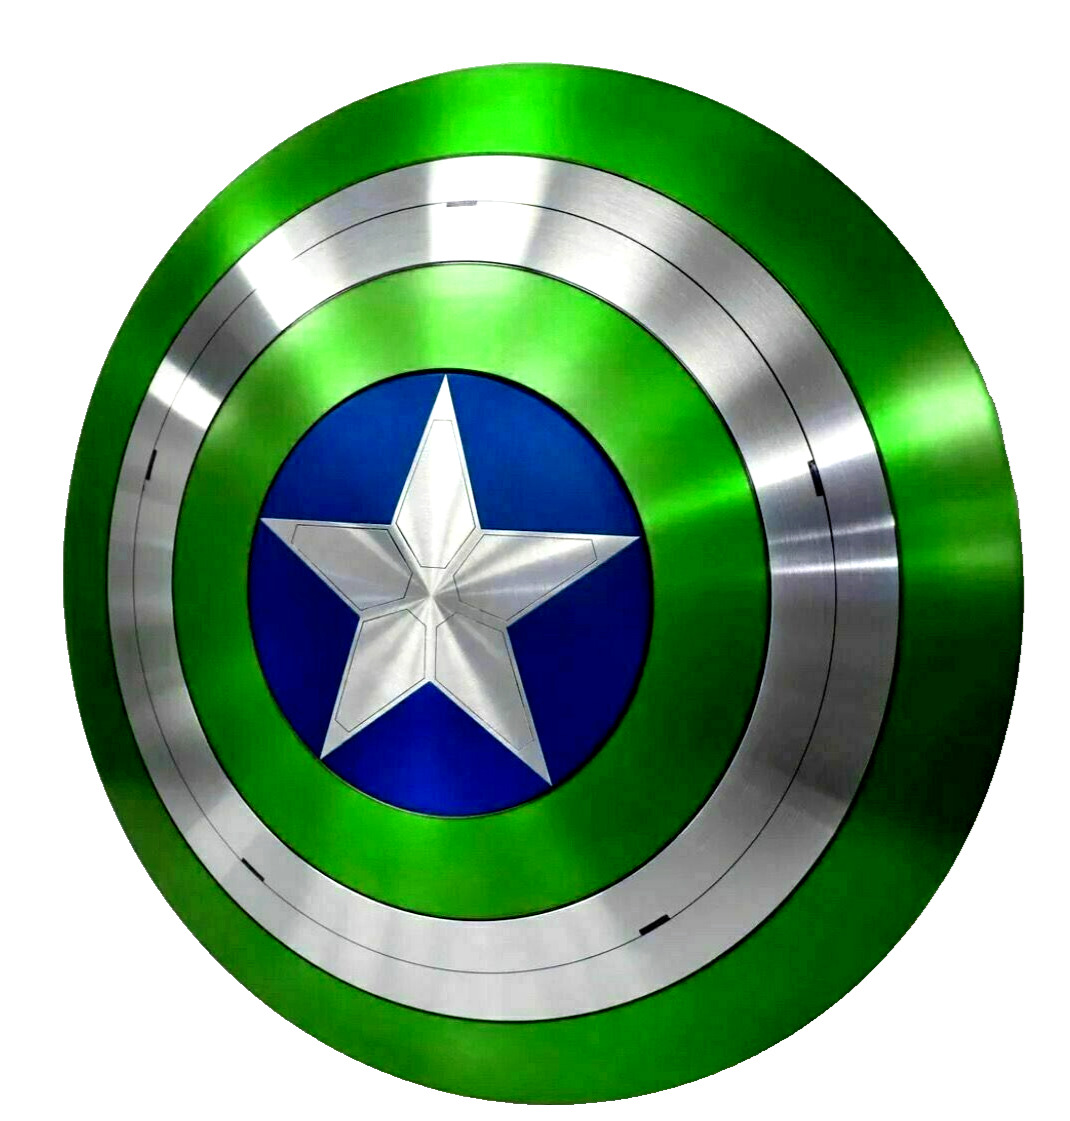 Green Captain America Shield With Star Pattern Emerged Metal Prop Replica shield